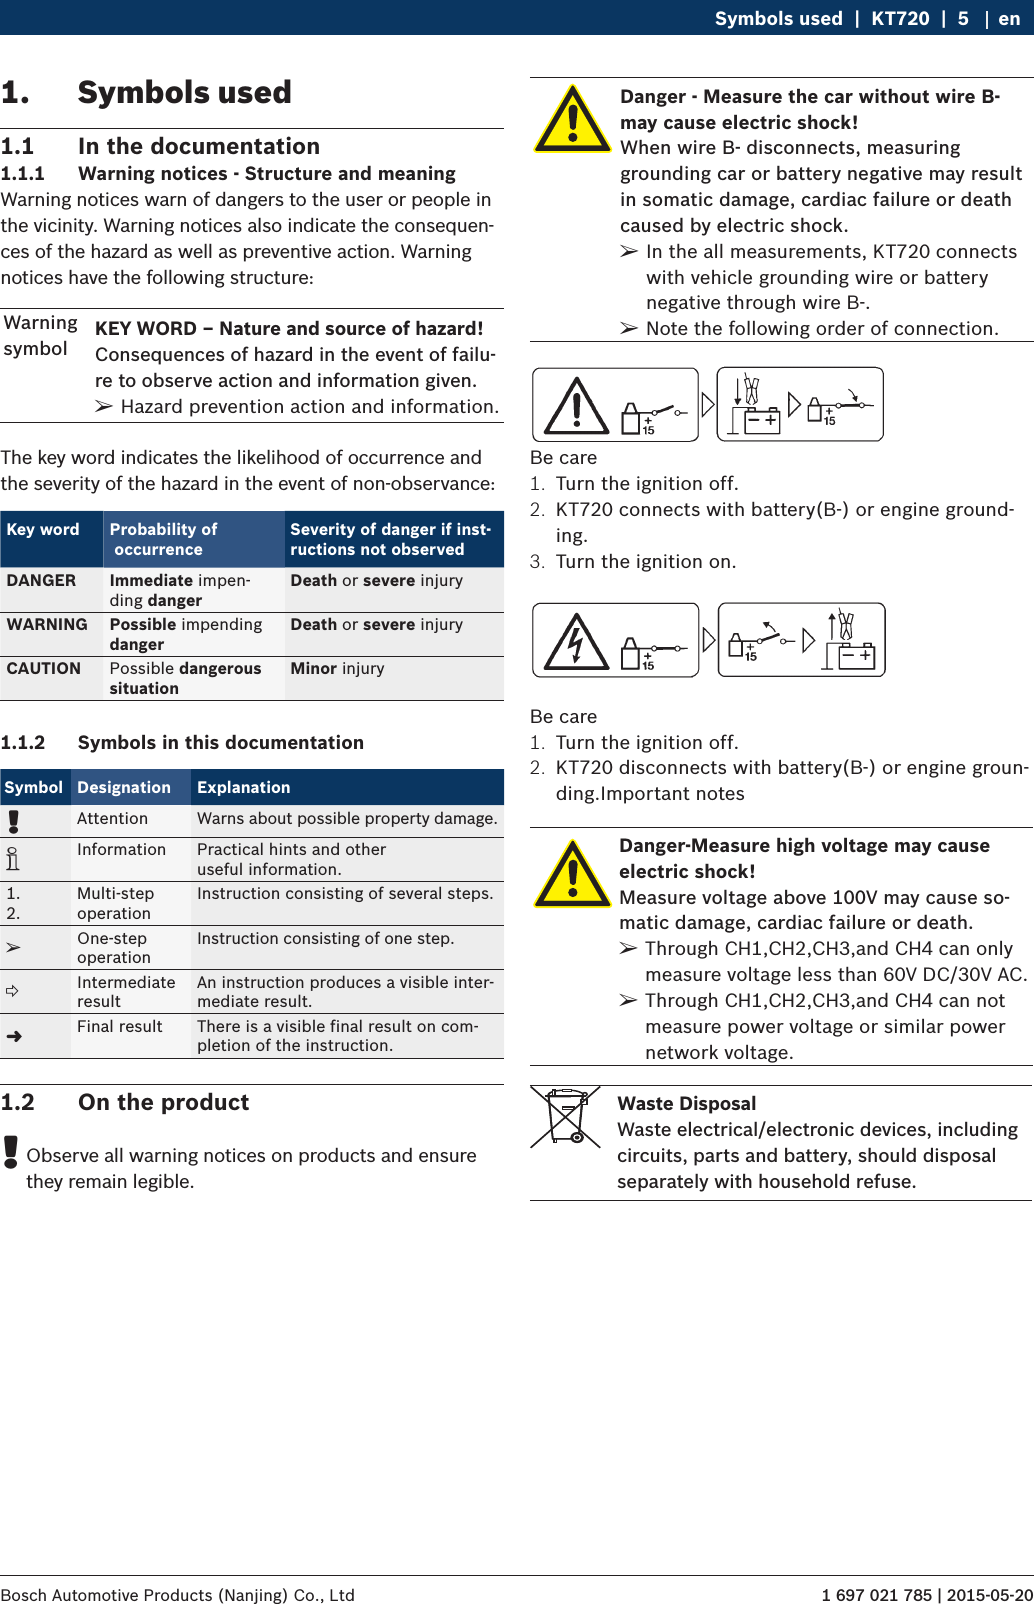 1 697 021 785 | 2015-05-20Bosch Automotive Products (Nanjing) Co., Ltd Symbols used  |  KT720  |  5 en1.  Symbols used1.1  In the documentation1.1.1  Warning notices - Structure and meaningWarning notices warn of dangers to the user or people in the vicinity. Warning notices also indicate the consequen-ces of the hazard as well as preventive action. Warning notices have the following structure:Warning symbolKEY WORD – Nature and source of hazard!Consequences of hazard in the event of failu-re to observe action and information given. ¶Hazard prevention action and information.The key word indicates the likelihood of occurrence and the severity of the hazard in the event of non-observance:Key word Probability of  occurrenceSeverity of danger if inst-ructions not observedDANGER Immediate impen-ding dangerDeath or severe injuryWARNING Possible impending dangerDeath or severe injuryCAUTION Possible dangerous  situationMinor injury1.1.2  Symbols in this documentationSymbol Designation Explanation!Attention Warns about possible property damage.iInformation Practical hints and other  useful information.1.2.Multi-step  operationInstruction consisting of several steps.eOne-step  operationInstruction consisting of one step.Intermediate resultAn instruction produces a visible inter-mediate result.&quot;Final result There is a visible final result on com-pletion of the instruction.1.2  On the product !Observe all warning notices on products and ensure they remain legible.Danger - Measure the car without wire B- may cause electric shock!When wire B- disconnects, measuring grounding car or battery negative may result in somatic damage, cardiac failure or death caused by electric shock. ¶In the all measurements, KT720 connects with vehicle grounding wire or battery negative through wire B-. ¶Note the following order of connection.Be care1.  Turn the ignition off.2.  KT720 connects with battery(B-) or engine ground-ing.3.  Turn the ignition on.Be care1.  Turn the ignition off.2.  KT720 disconnects with battery(B-) or engine groun-ding.Important notesDanger-Measure high voltage may cause electric shock!Measure voltage above 100V may cause so-matic damage, cardiac failure or death. ¶Through CH1,CH2,CH3,and CH4 can only measure voltage less than 60V DC/30V AC. ¶Through CH1,CH2,CH3,and CH4 can not measure power voltage or similar power network voltage.Waste DisposalWaste electrical/electronic devices, including circuits, parts and battery, should disposal separately with household refuse.